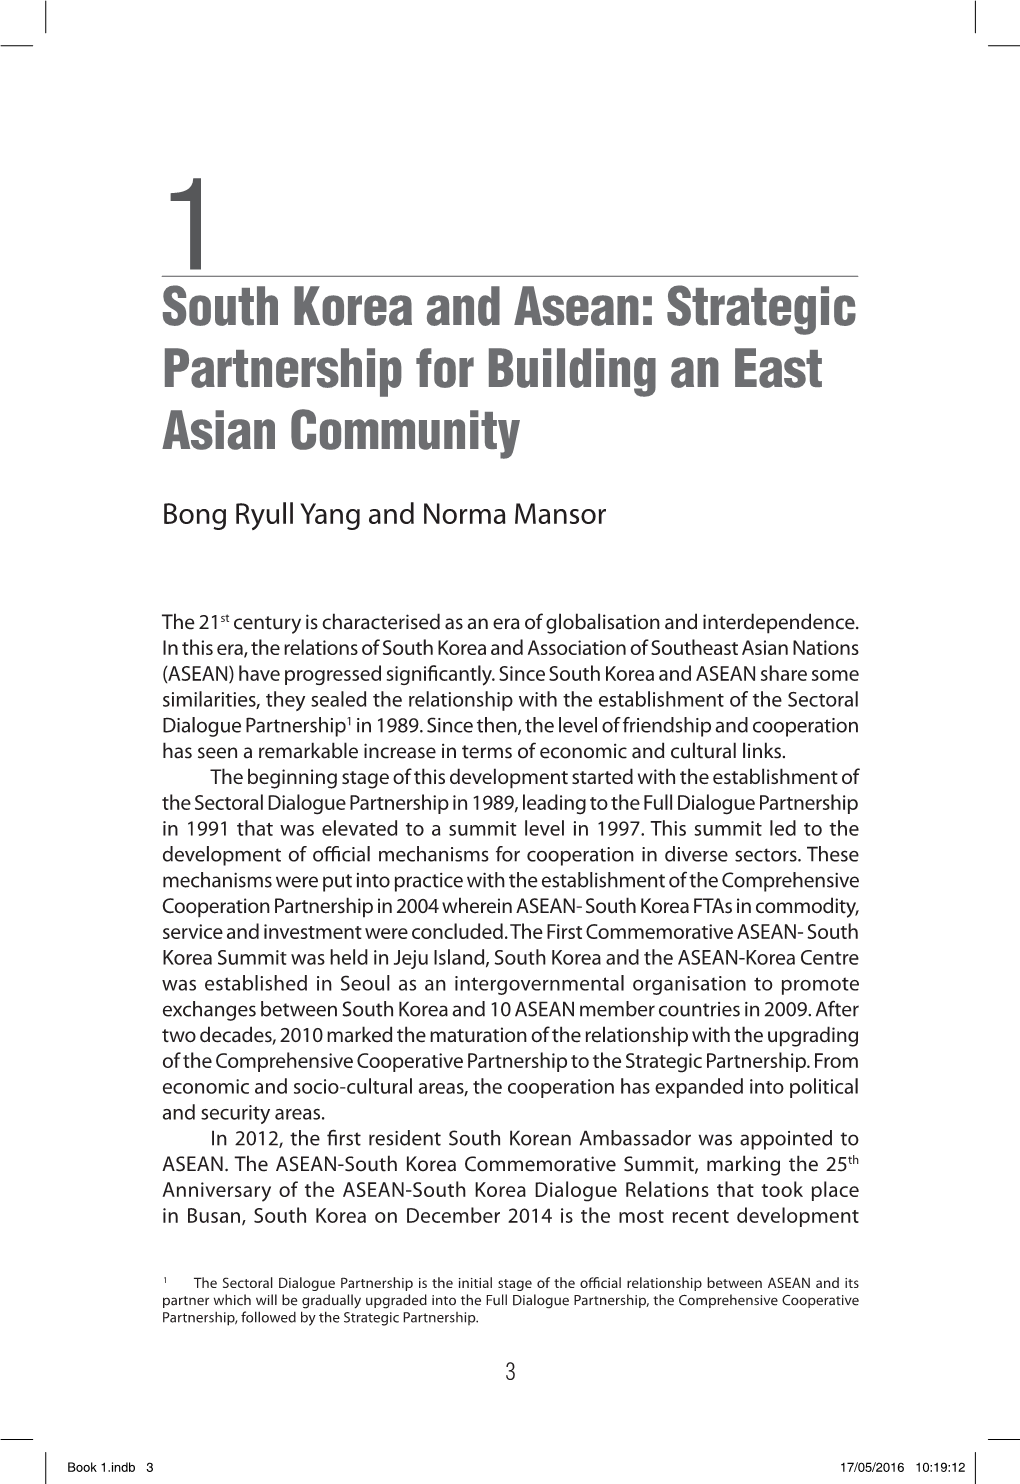 South Korea and Asean: Strategic Partnership for Building an East Asian Community